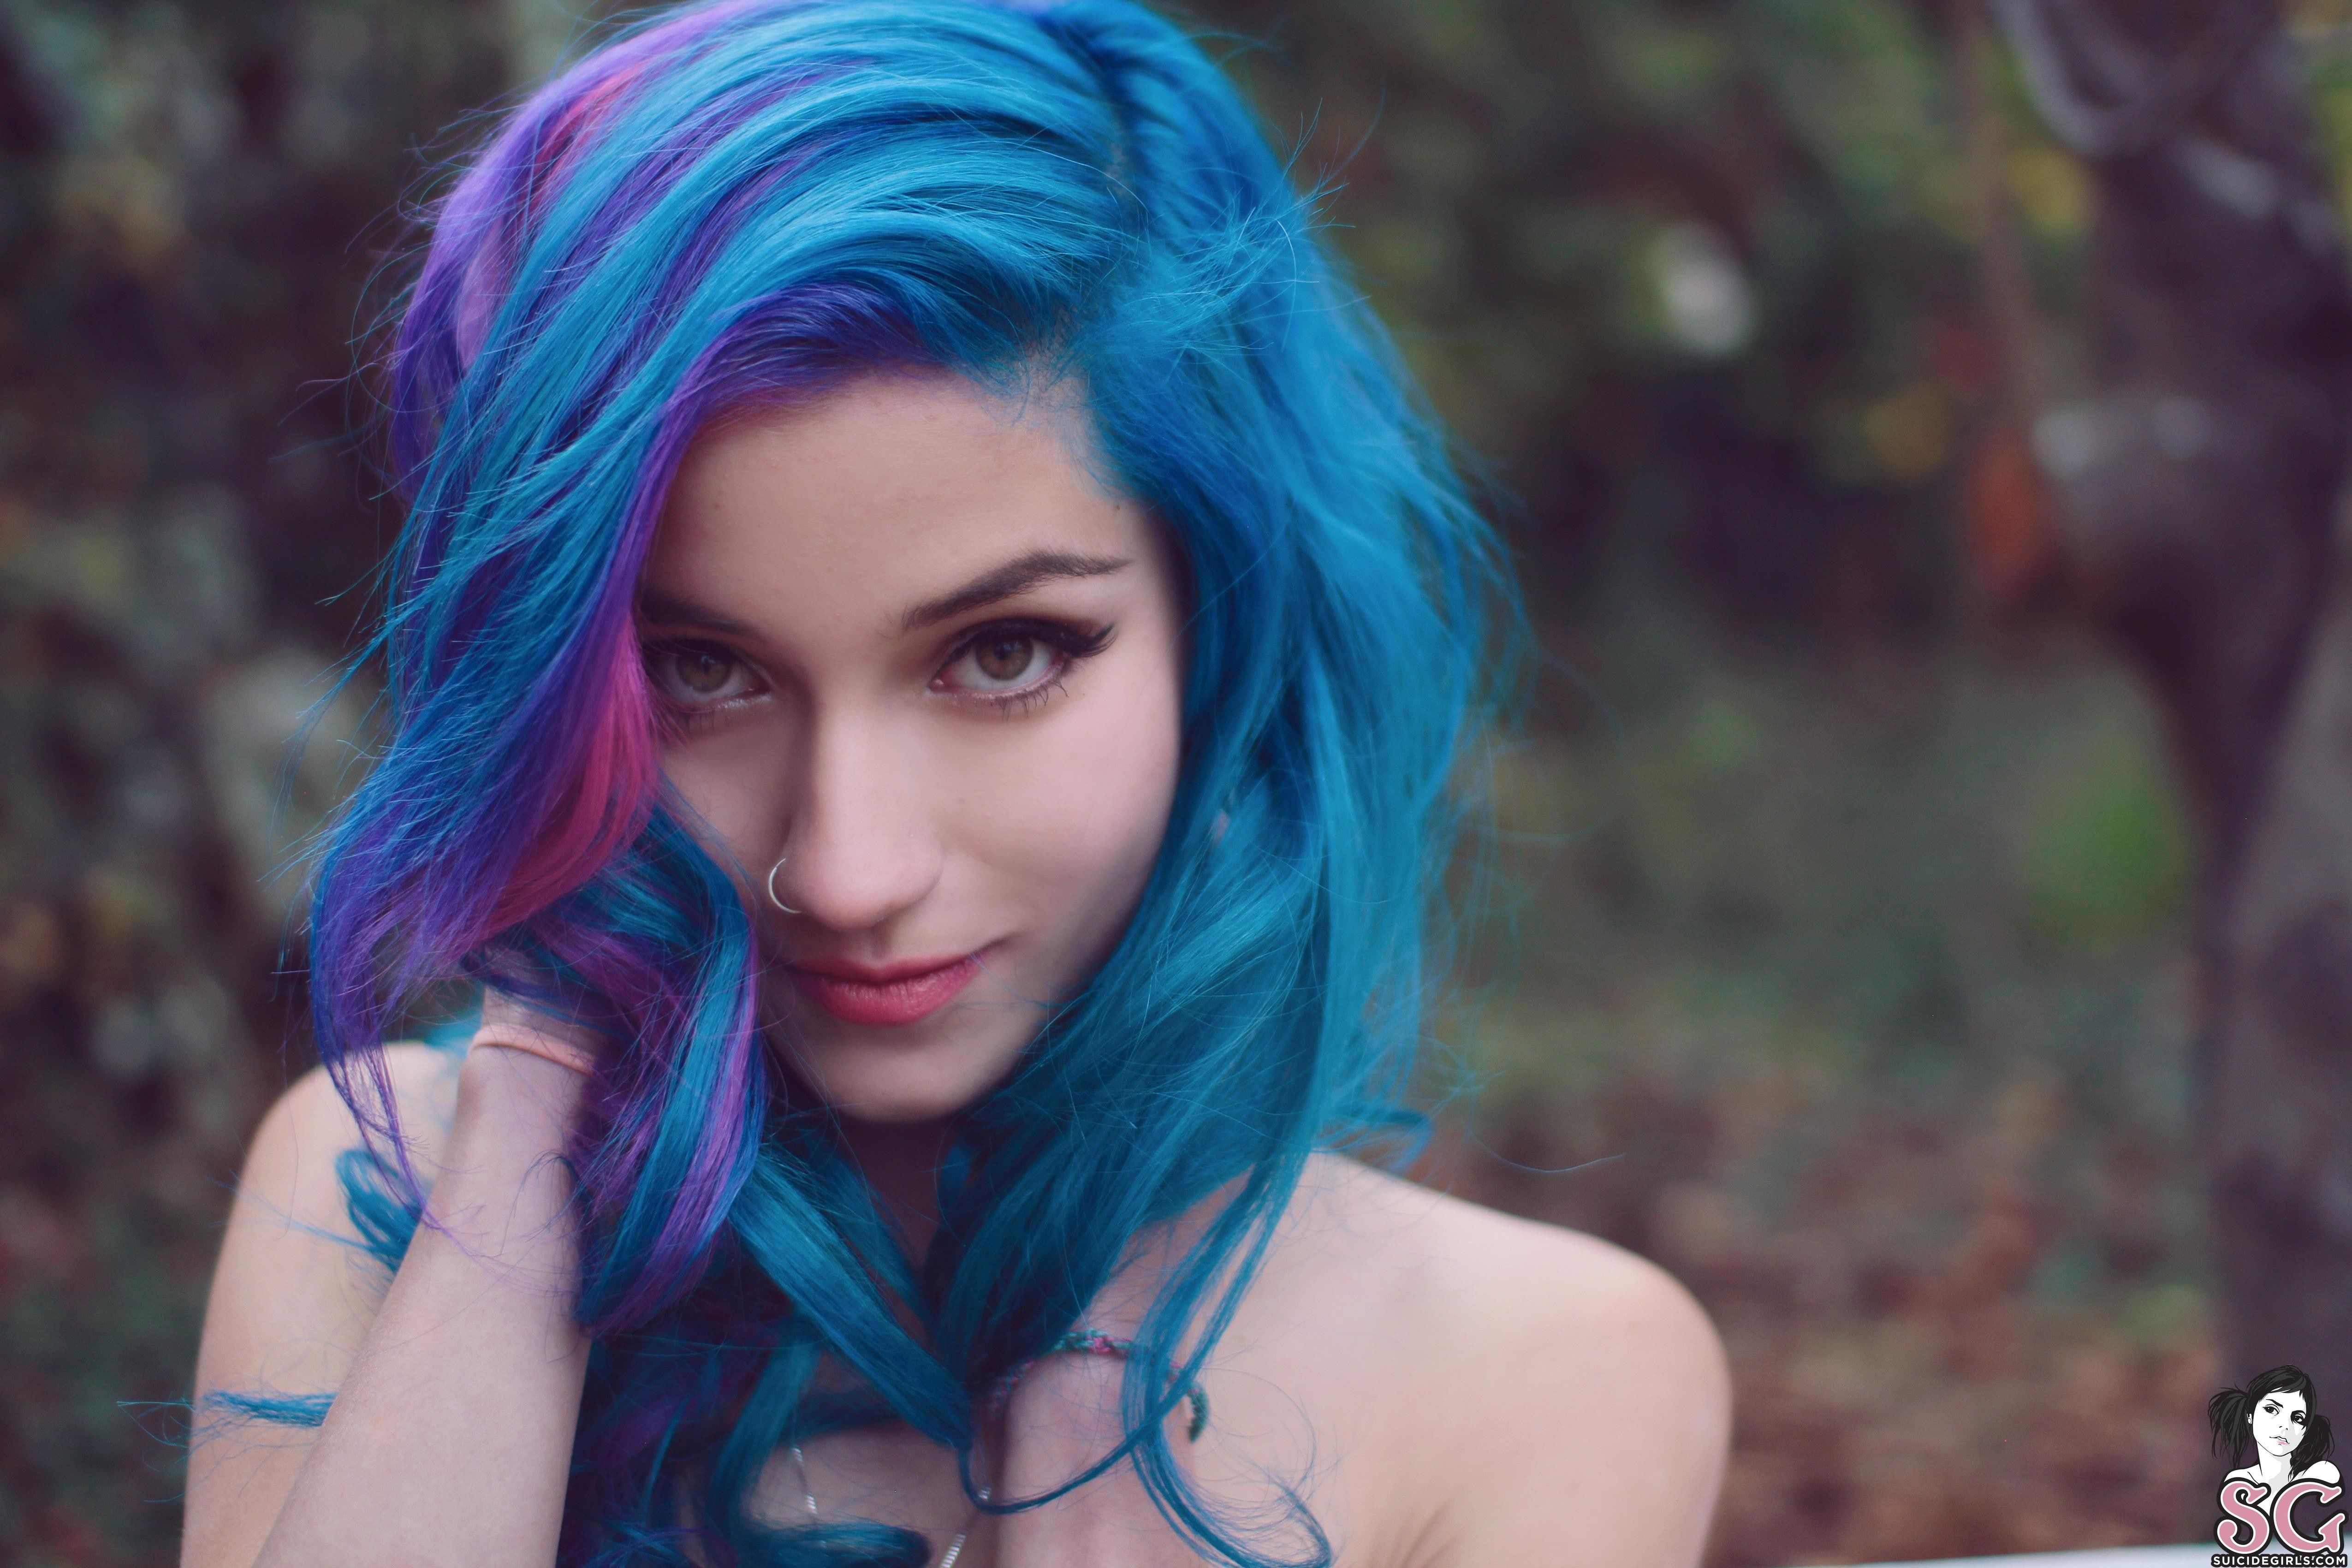 Girl with blue hair and paintbrush - wide 2